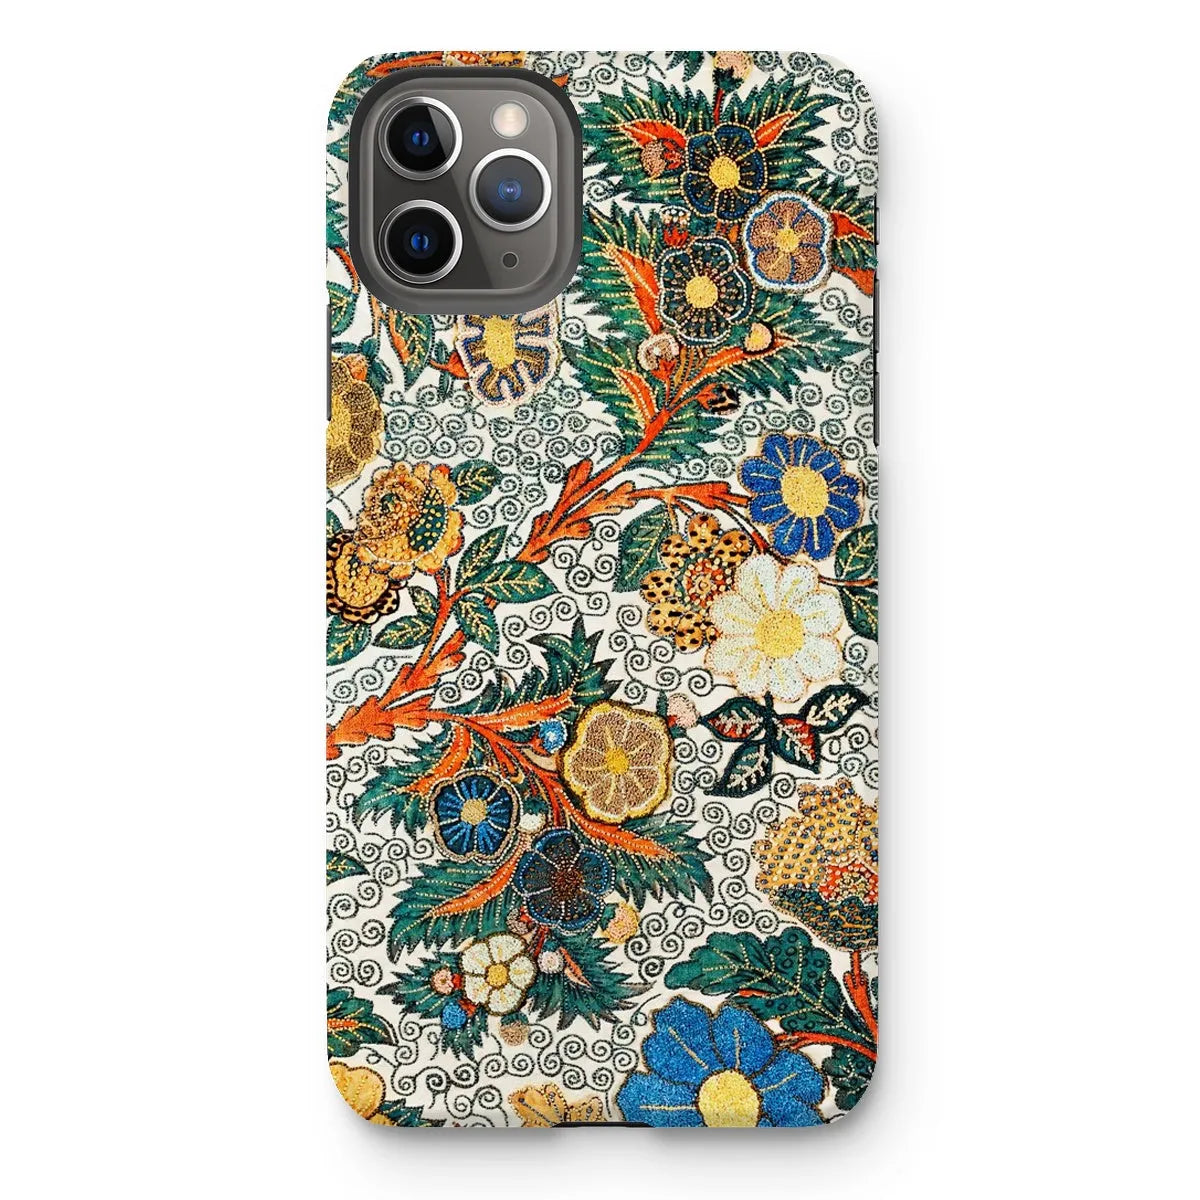 Blossomewhere Japanese Tapestry Art Phone Case - Iphone 11 Pro Max / Matte - Mobile Phone Cases - Aesthetic Art